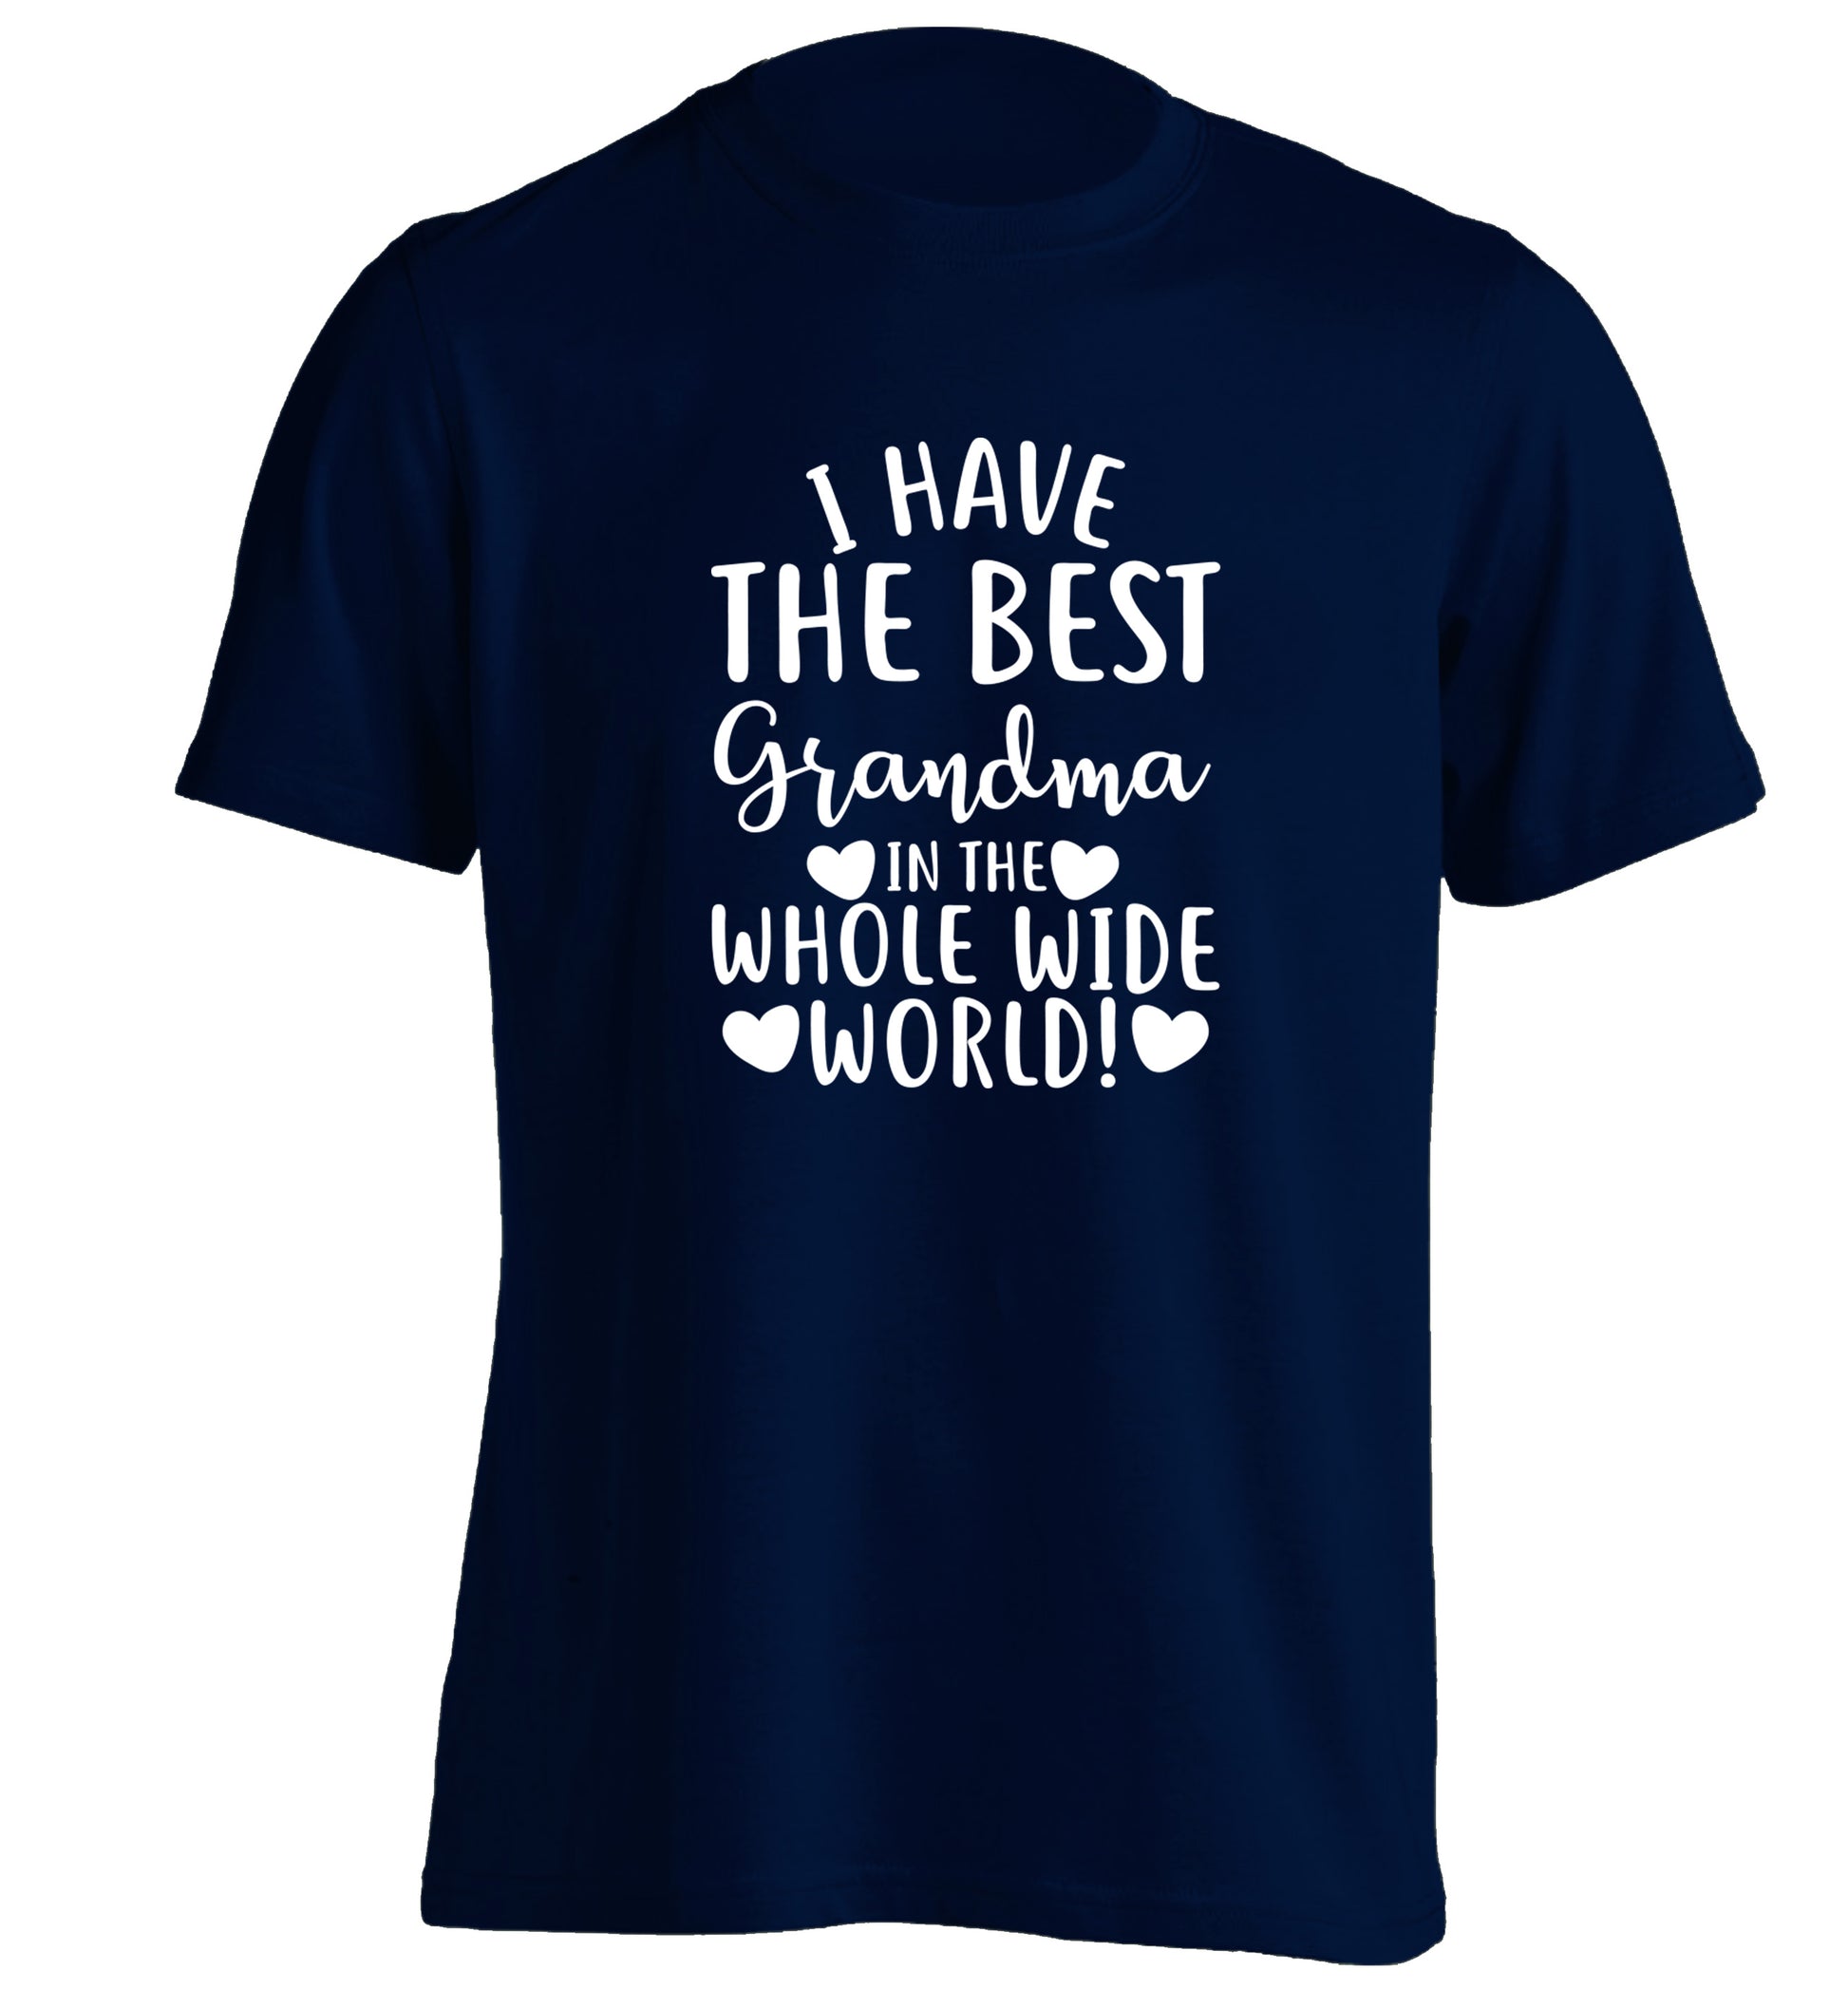 I have the best grandma in the whole wide world! adults unisex navy Tshirt 2XL